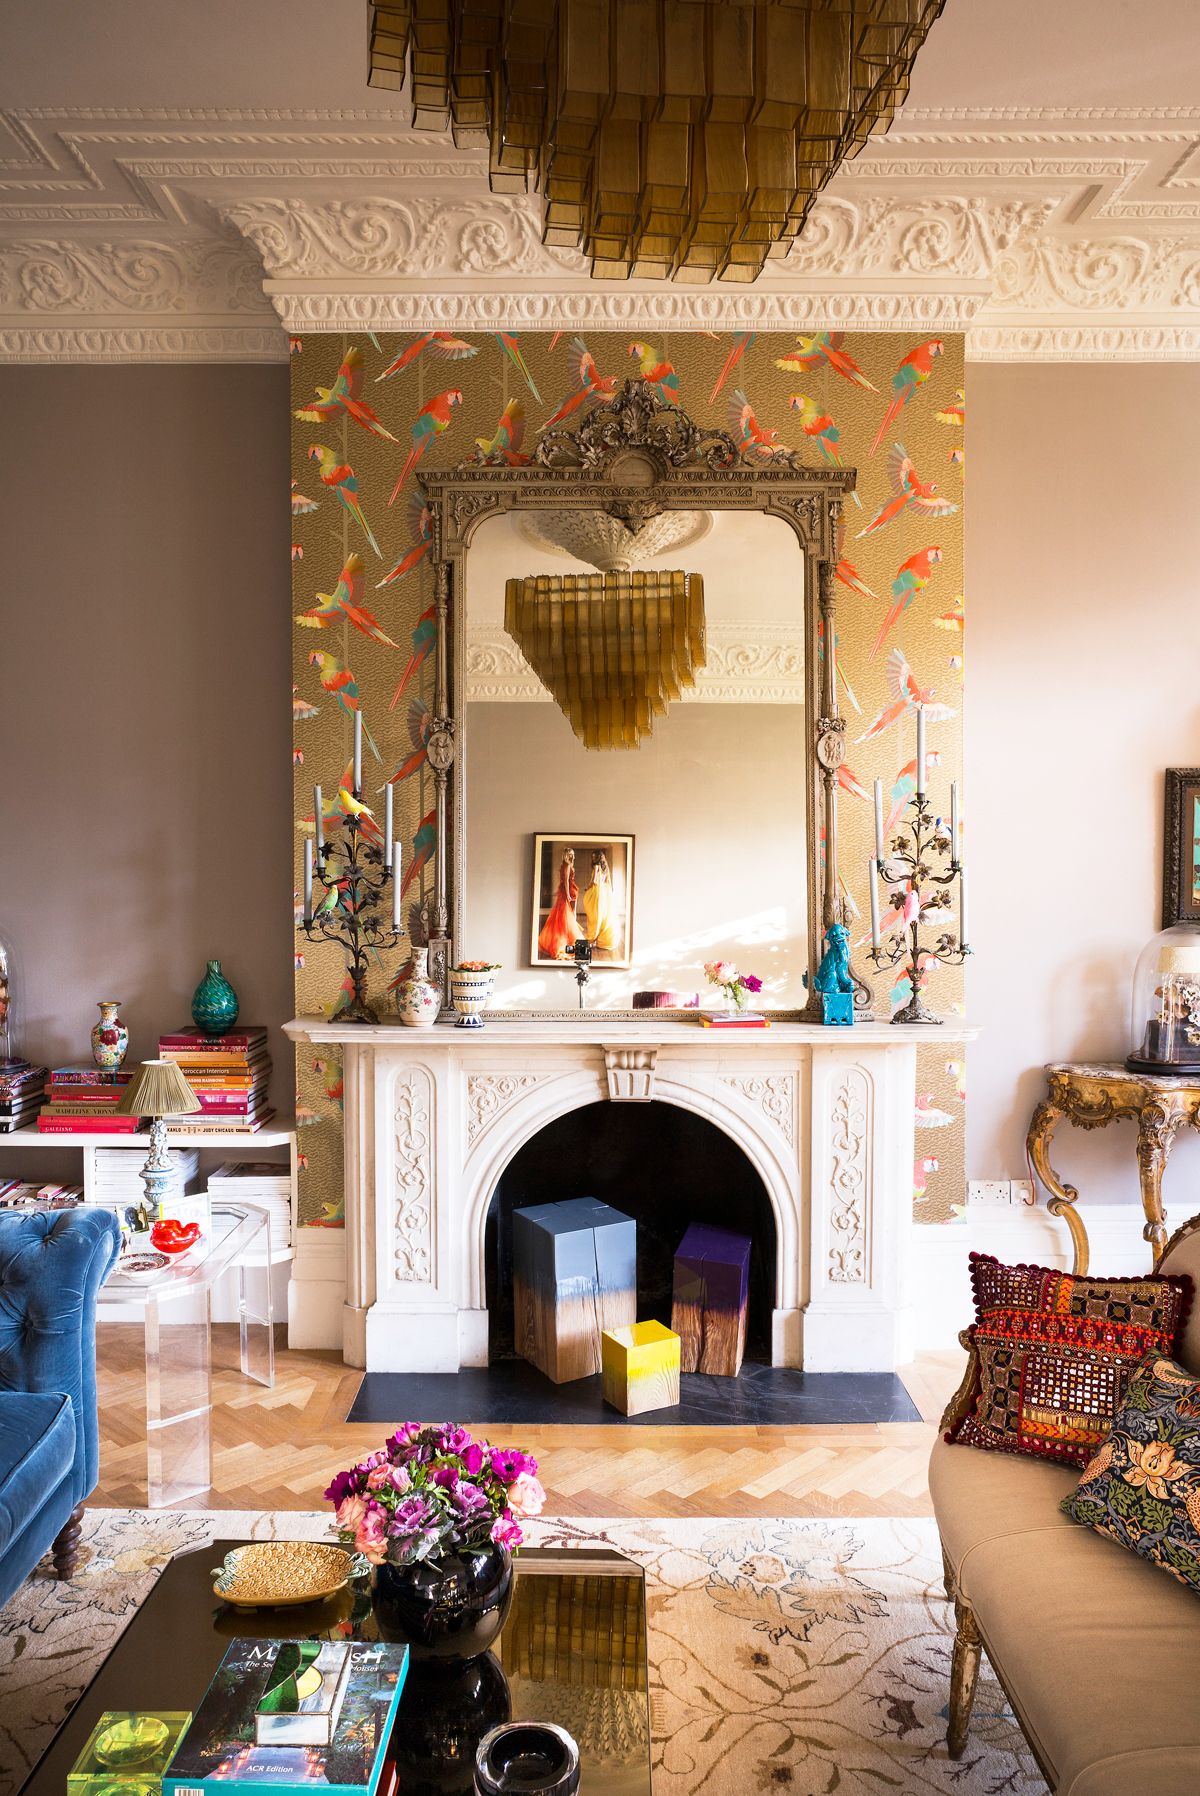 Matthew Williamson Designs Wallpapers and Fabrics for Osborne  Little   Architectural Digest